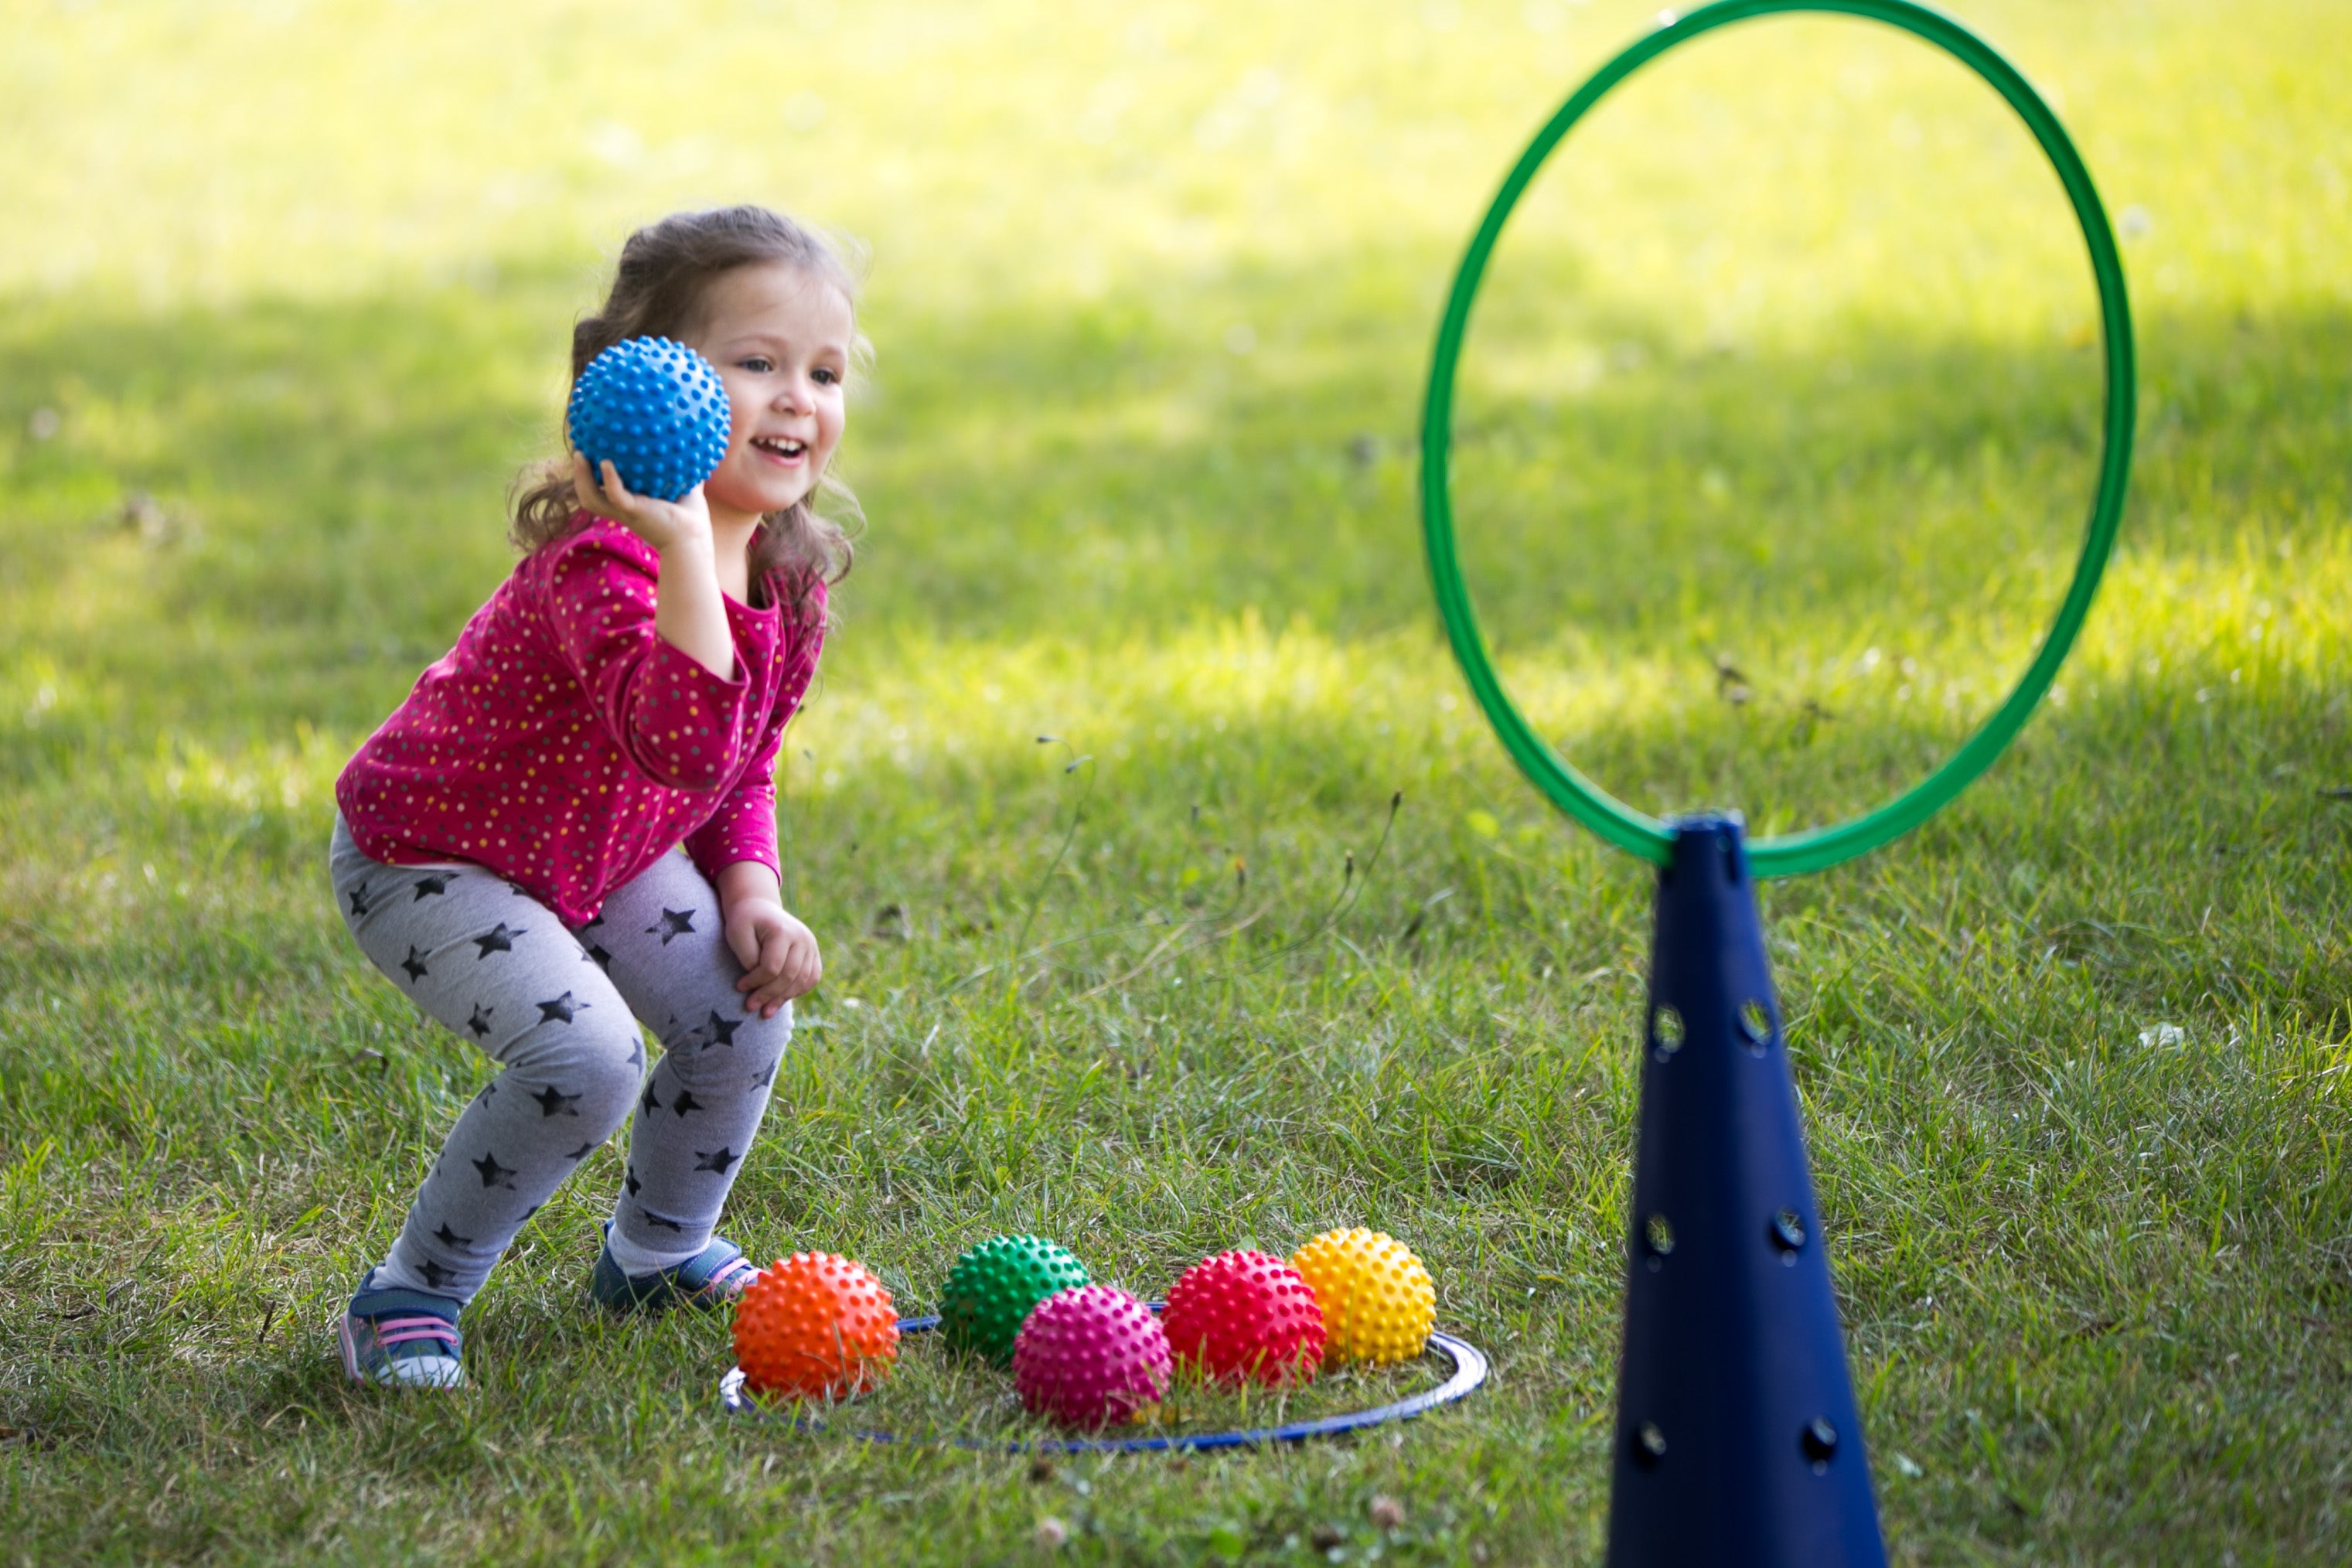 Sensory balls covered with raised bumps, and easy grip for a soft textured feel. Perfect for small children, this knobbly ball fosters grip and manipulation skills. Comes in a set of six pieces in assorted basic colors.